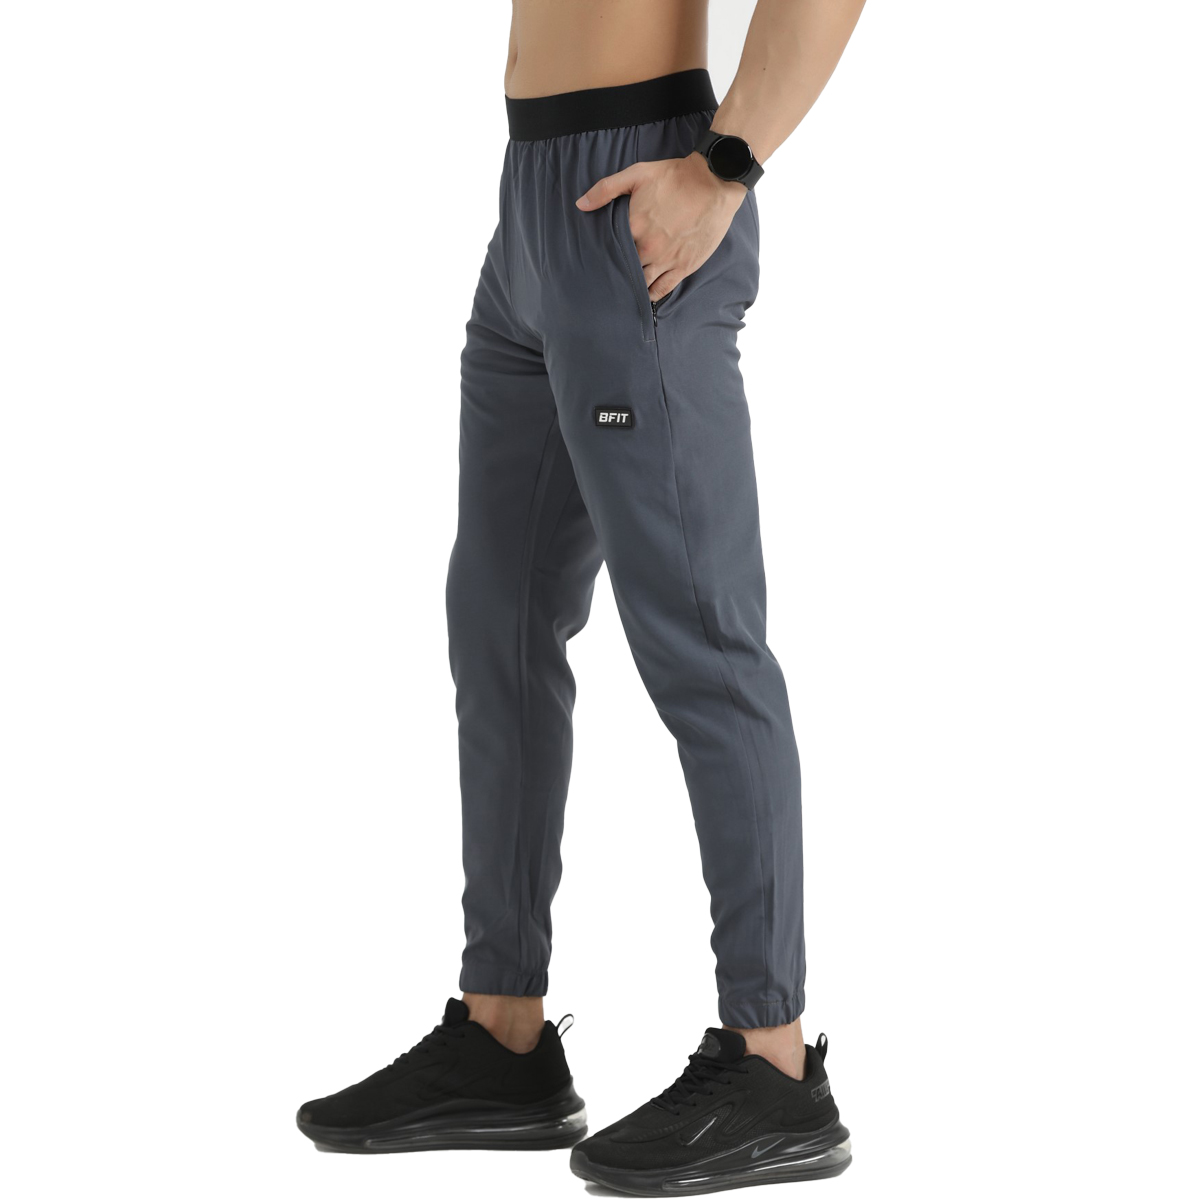 BFIT Men's Cross Compression Tights Fitness Trouser